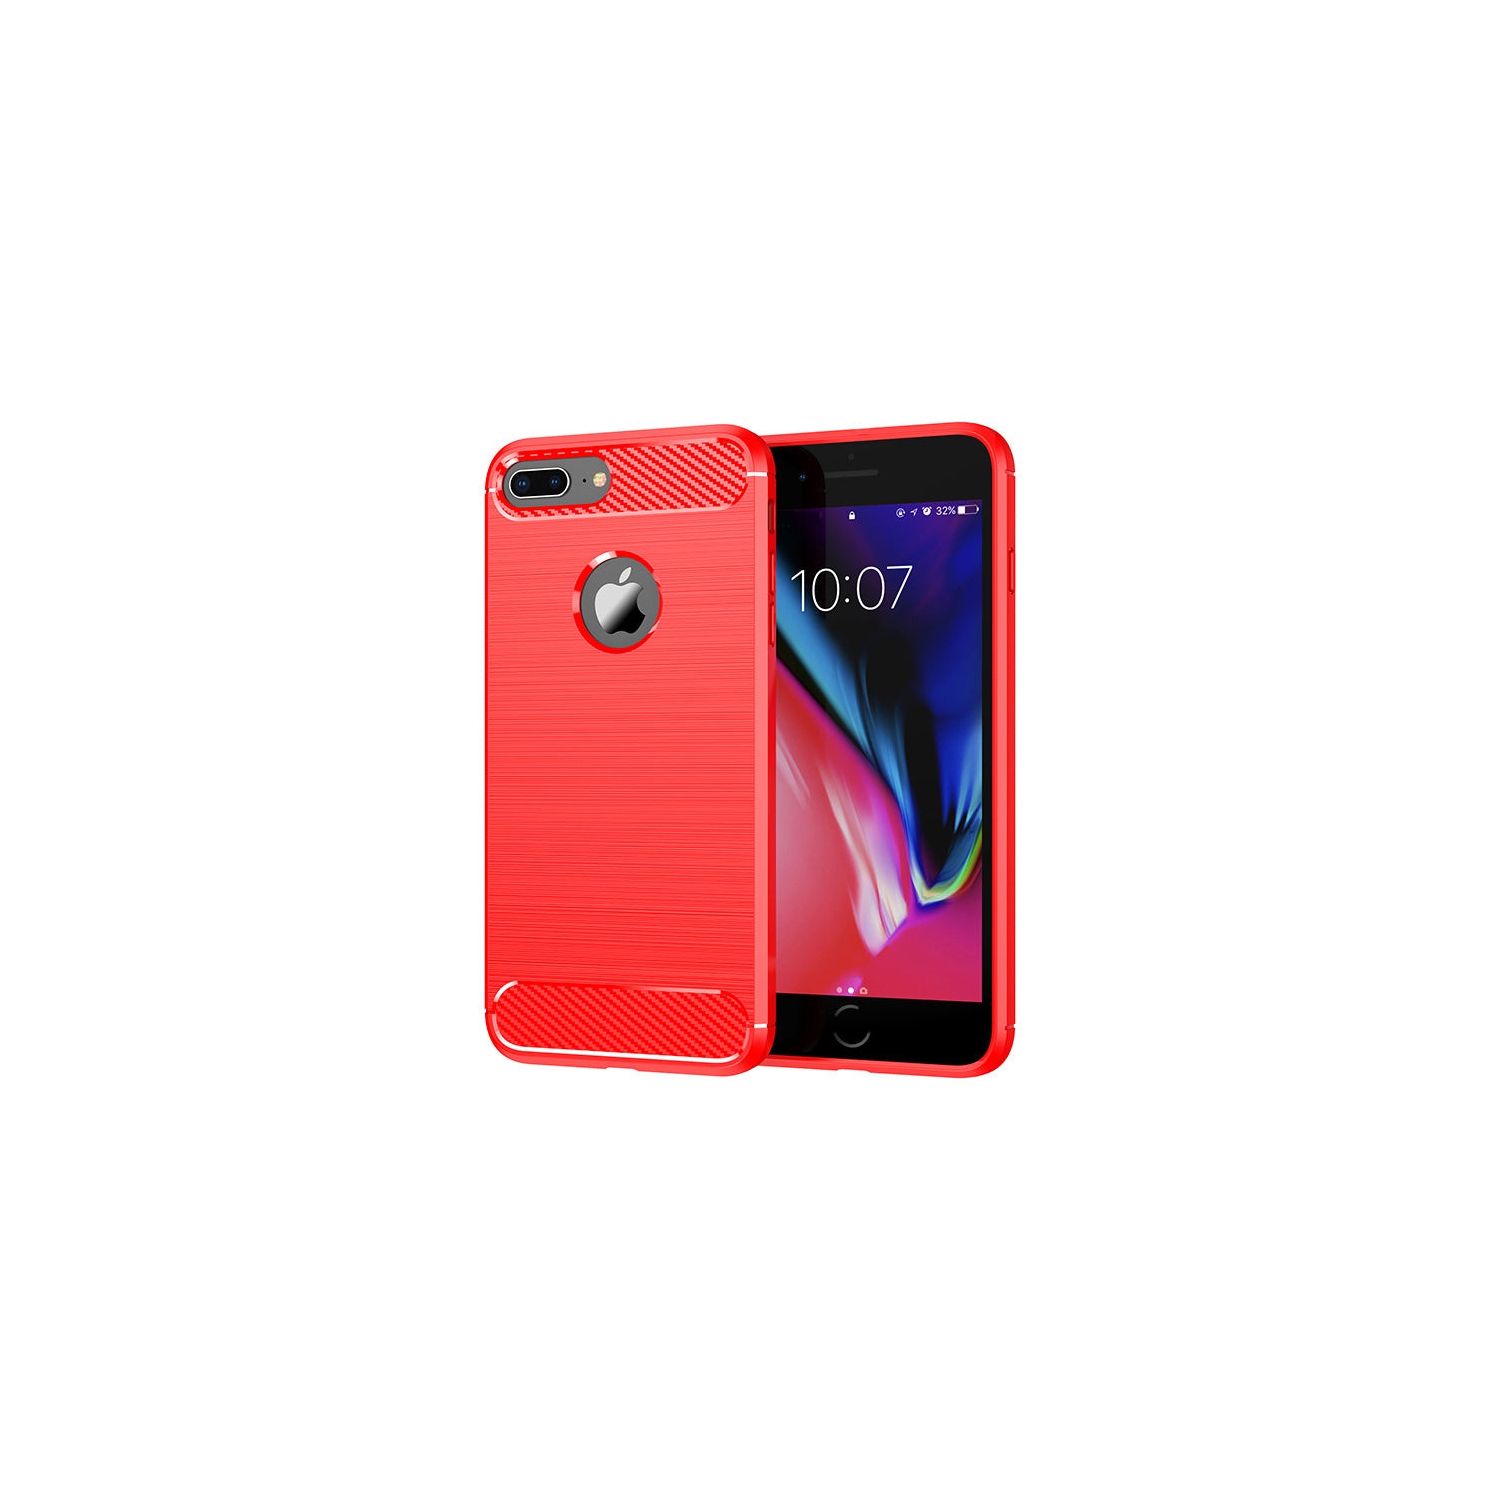 PANDACO Red Brushed Metal Case for iPhone 7 Plus or iPhone 8 Plus